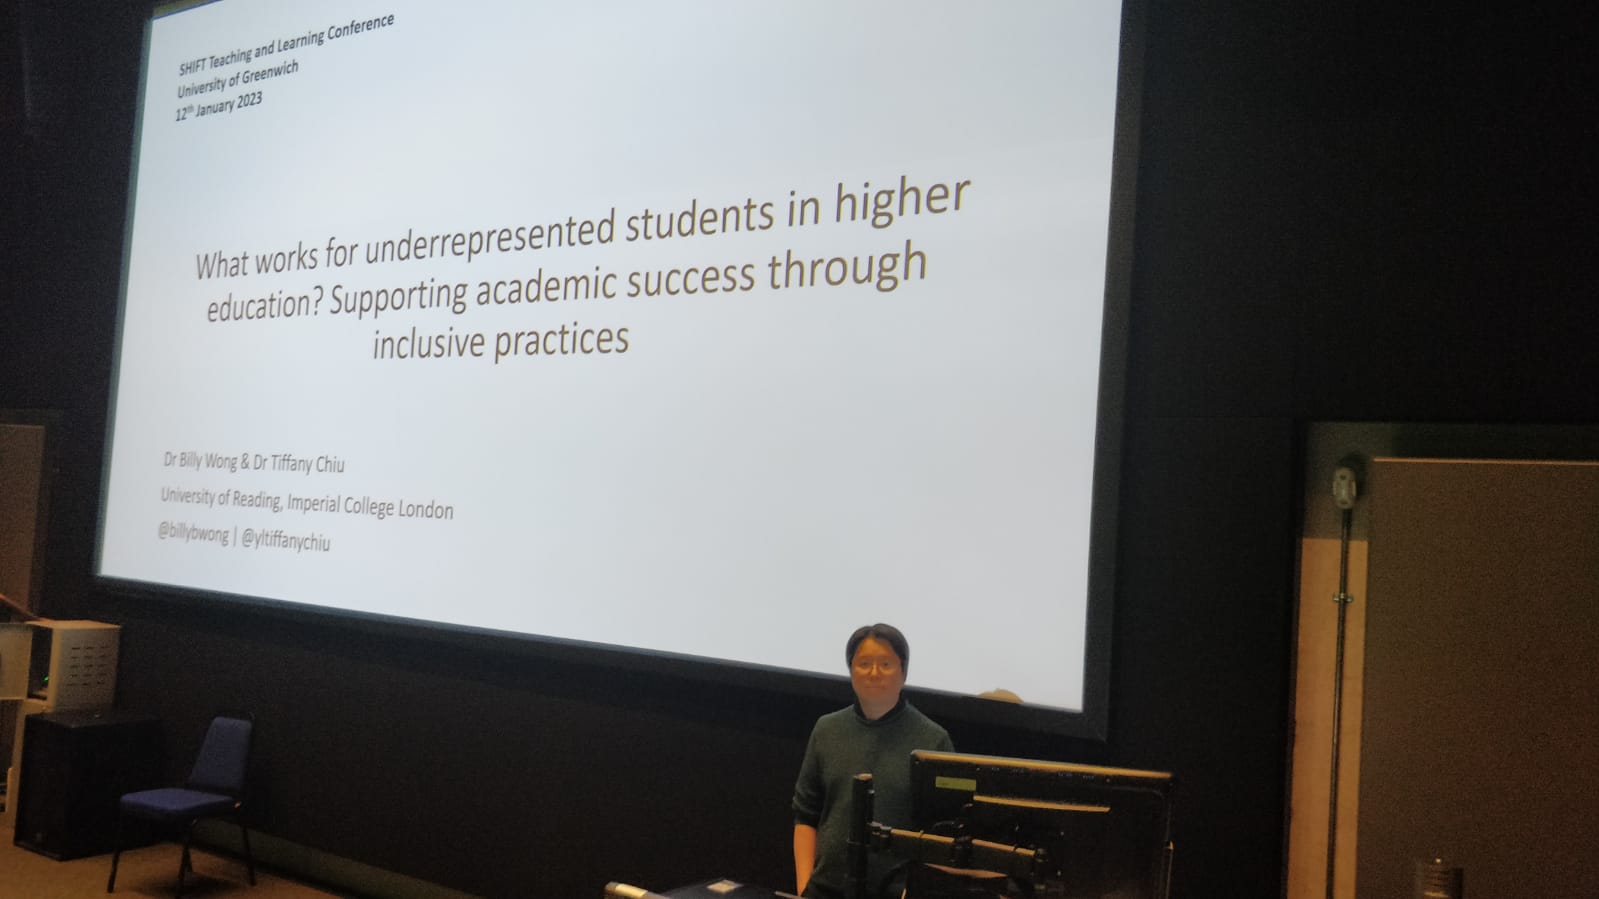 NEWS – Dr. Billy Wong (Associate Professor in Widening Participation, University of Reading’s Institute of Education) gave a keynote at the University of Greenwich’s annual Teaching & Learning conference